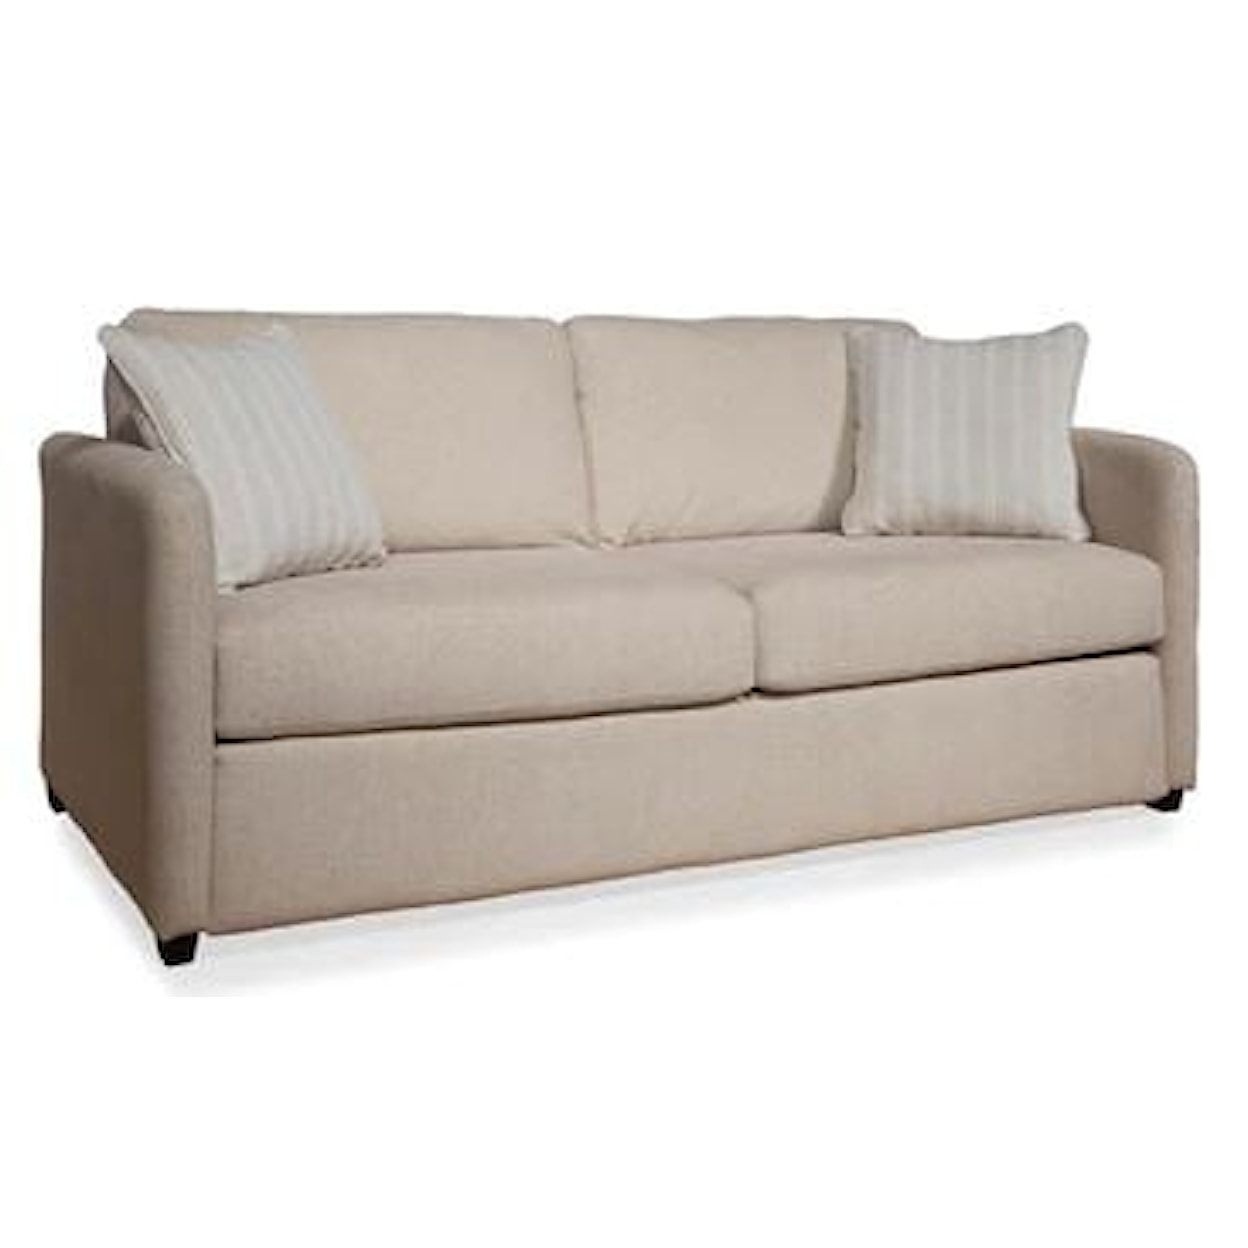 Southside Designs Sandra Queen Sofabed